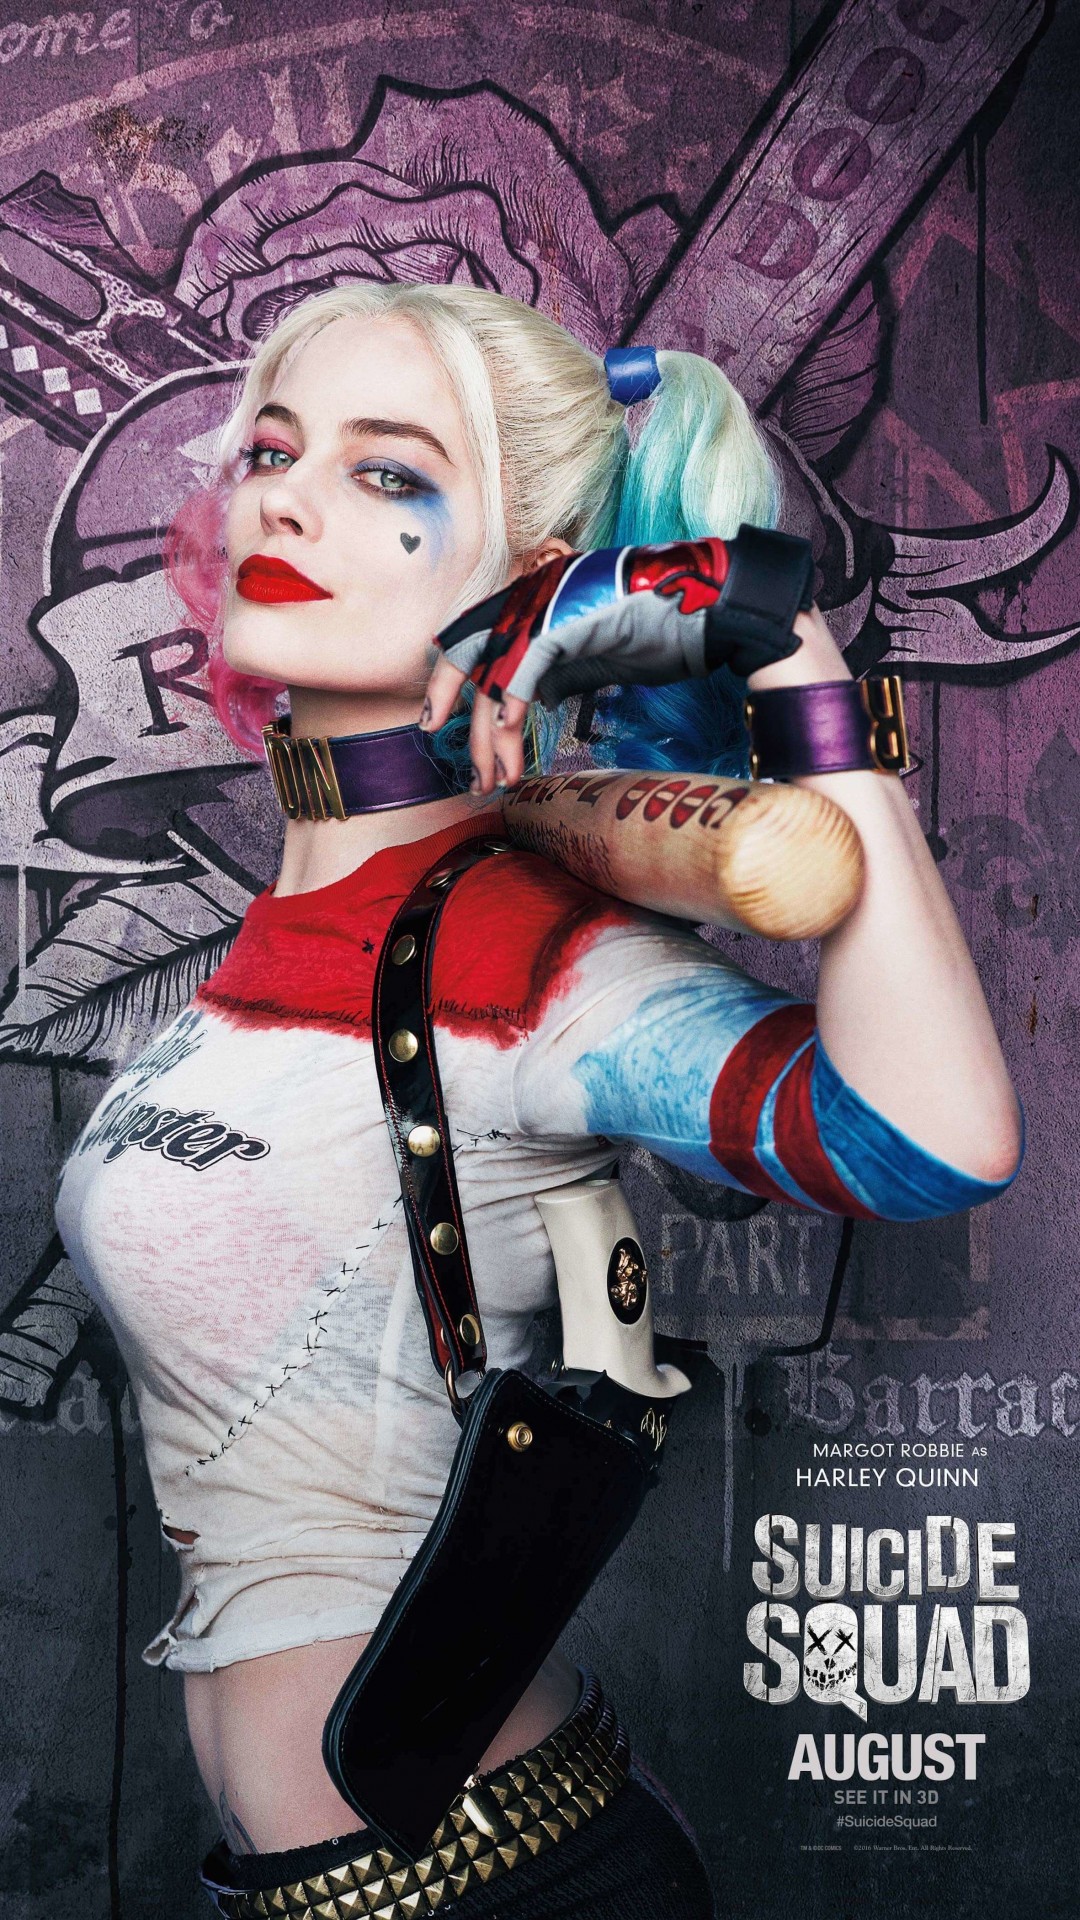 Harley Quinn - Suicide Squad Wallpaper for HTC One